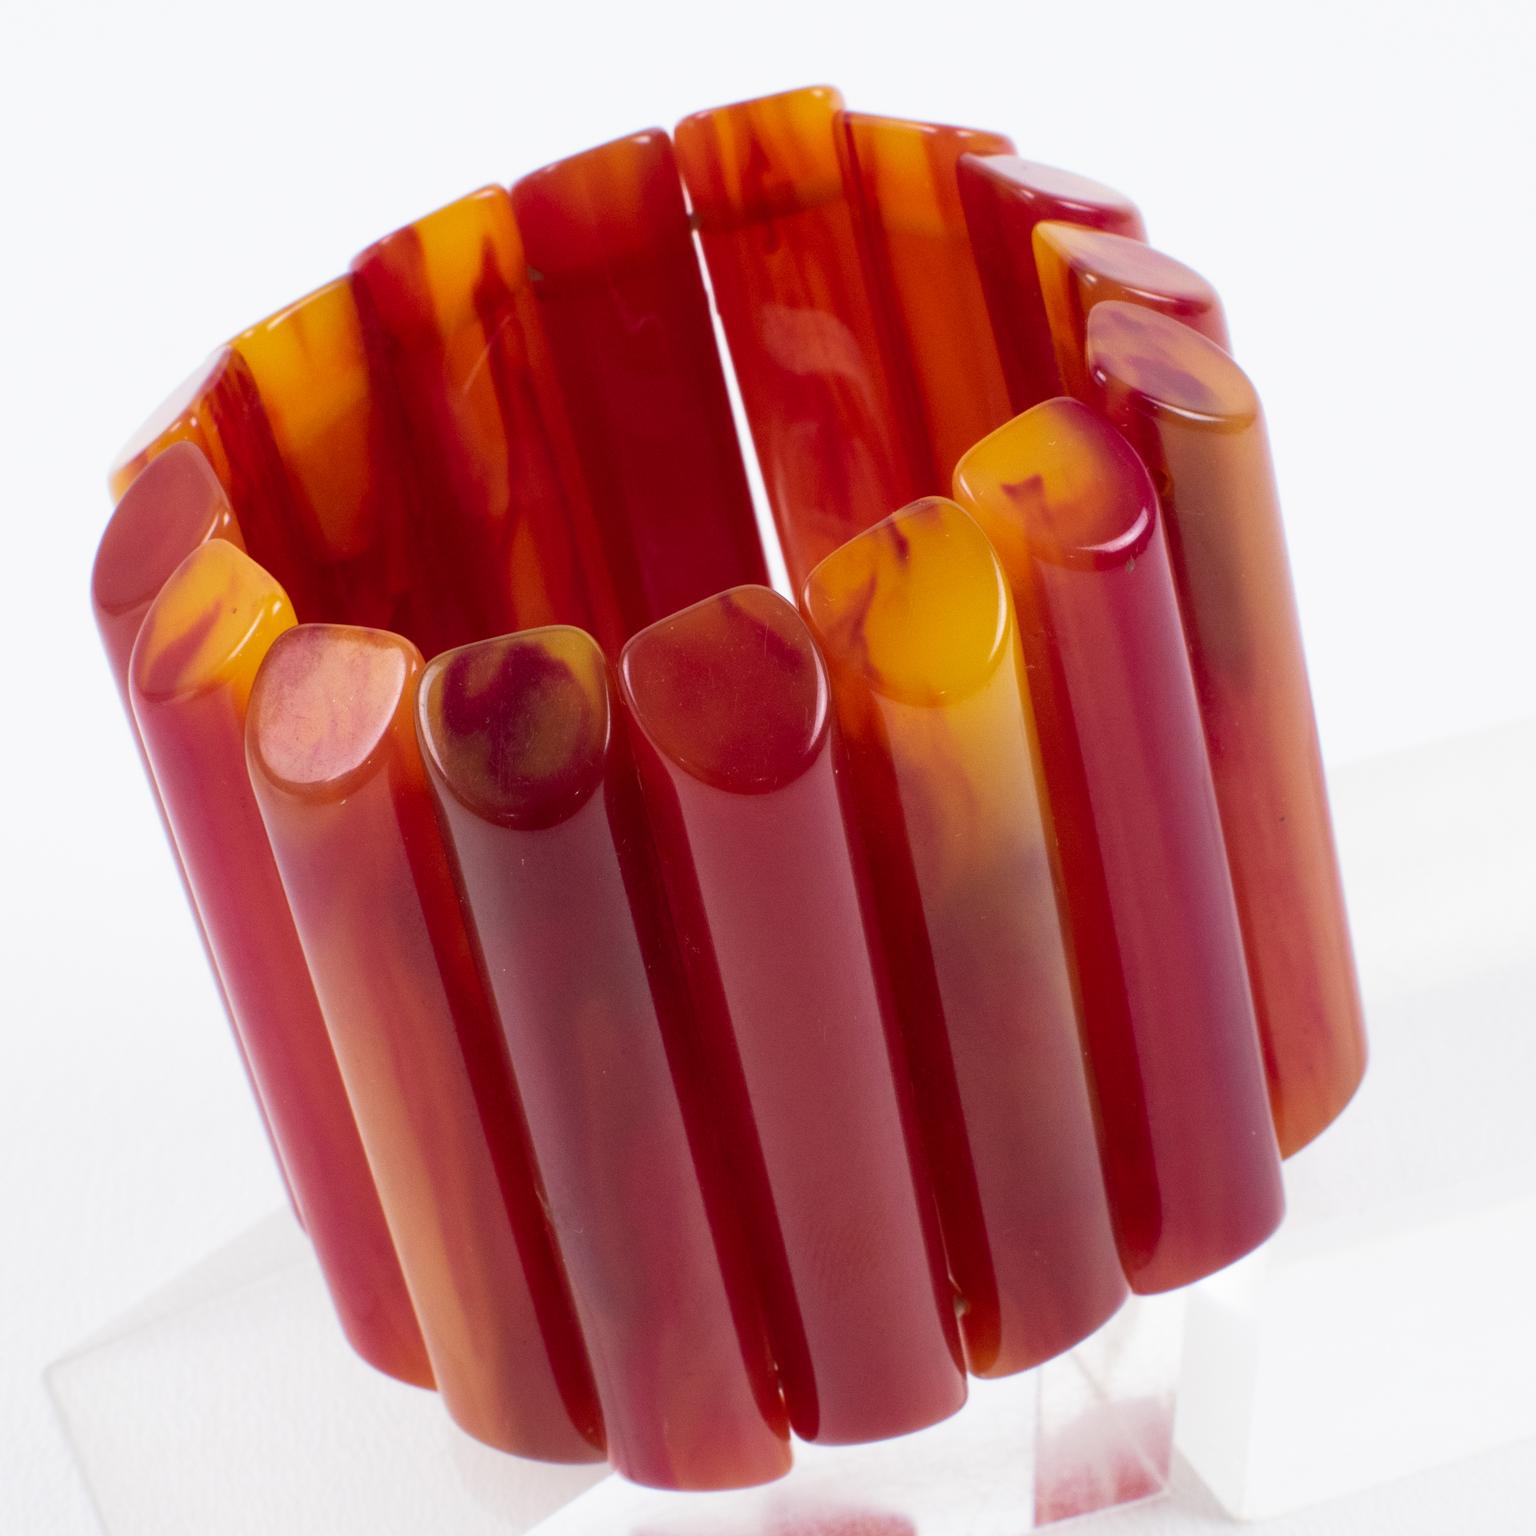 This is a superb Bakelite bracelet bangle that I think you'll love to wear or collect. The stretch design and oversized shape make it a rare find. The carved sticks add to their unique appeal with a gorgeous, intense hot pink fuchsia color with